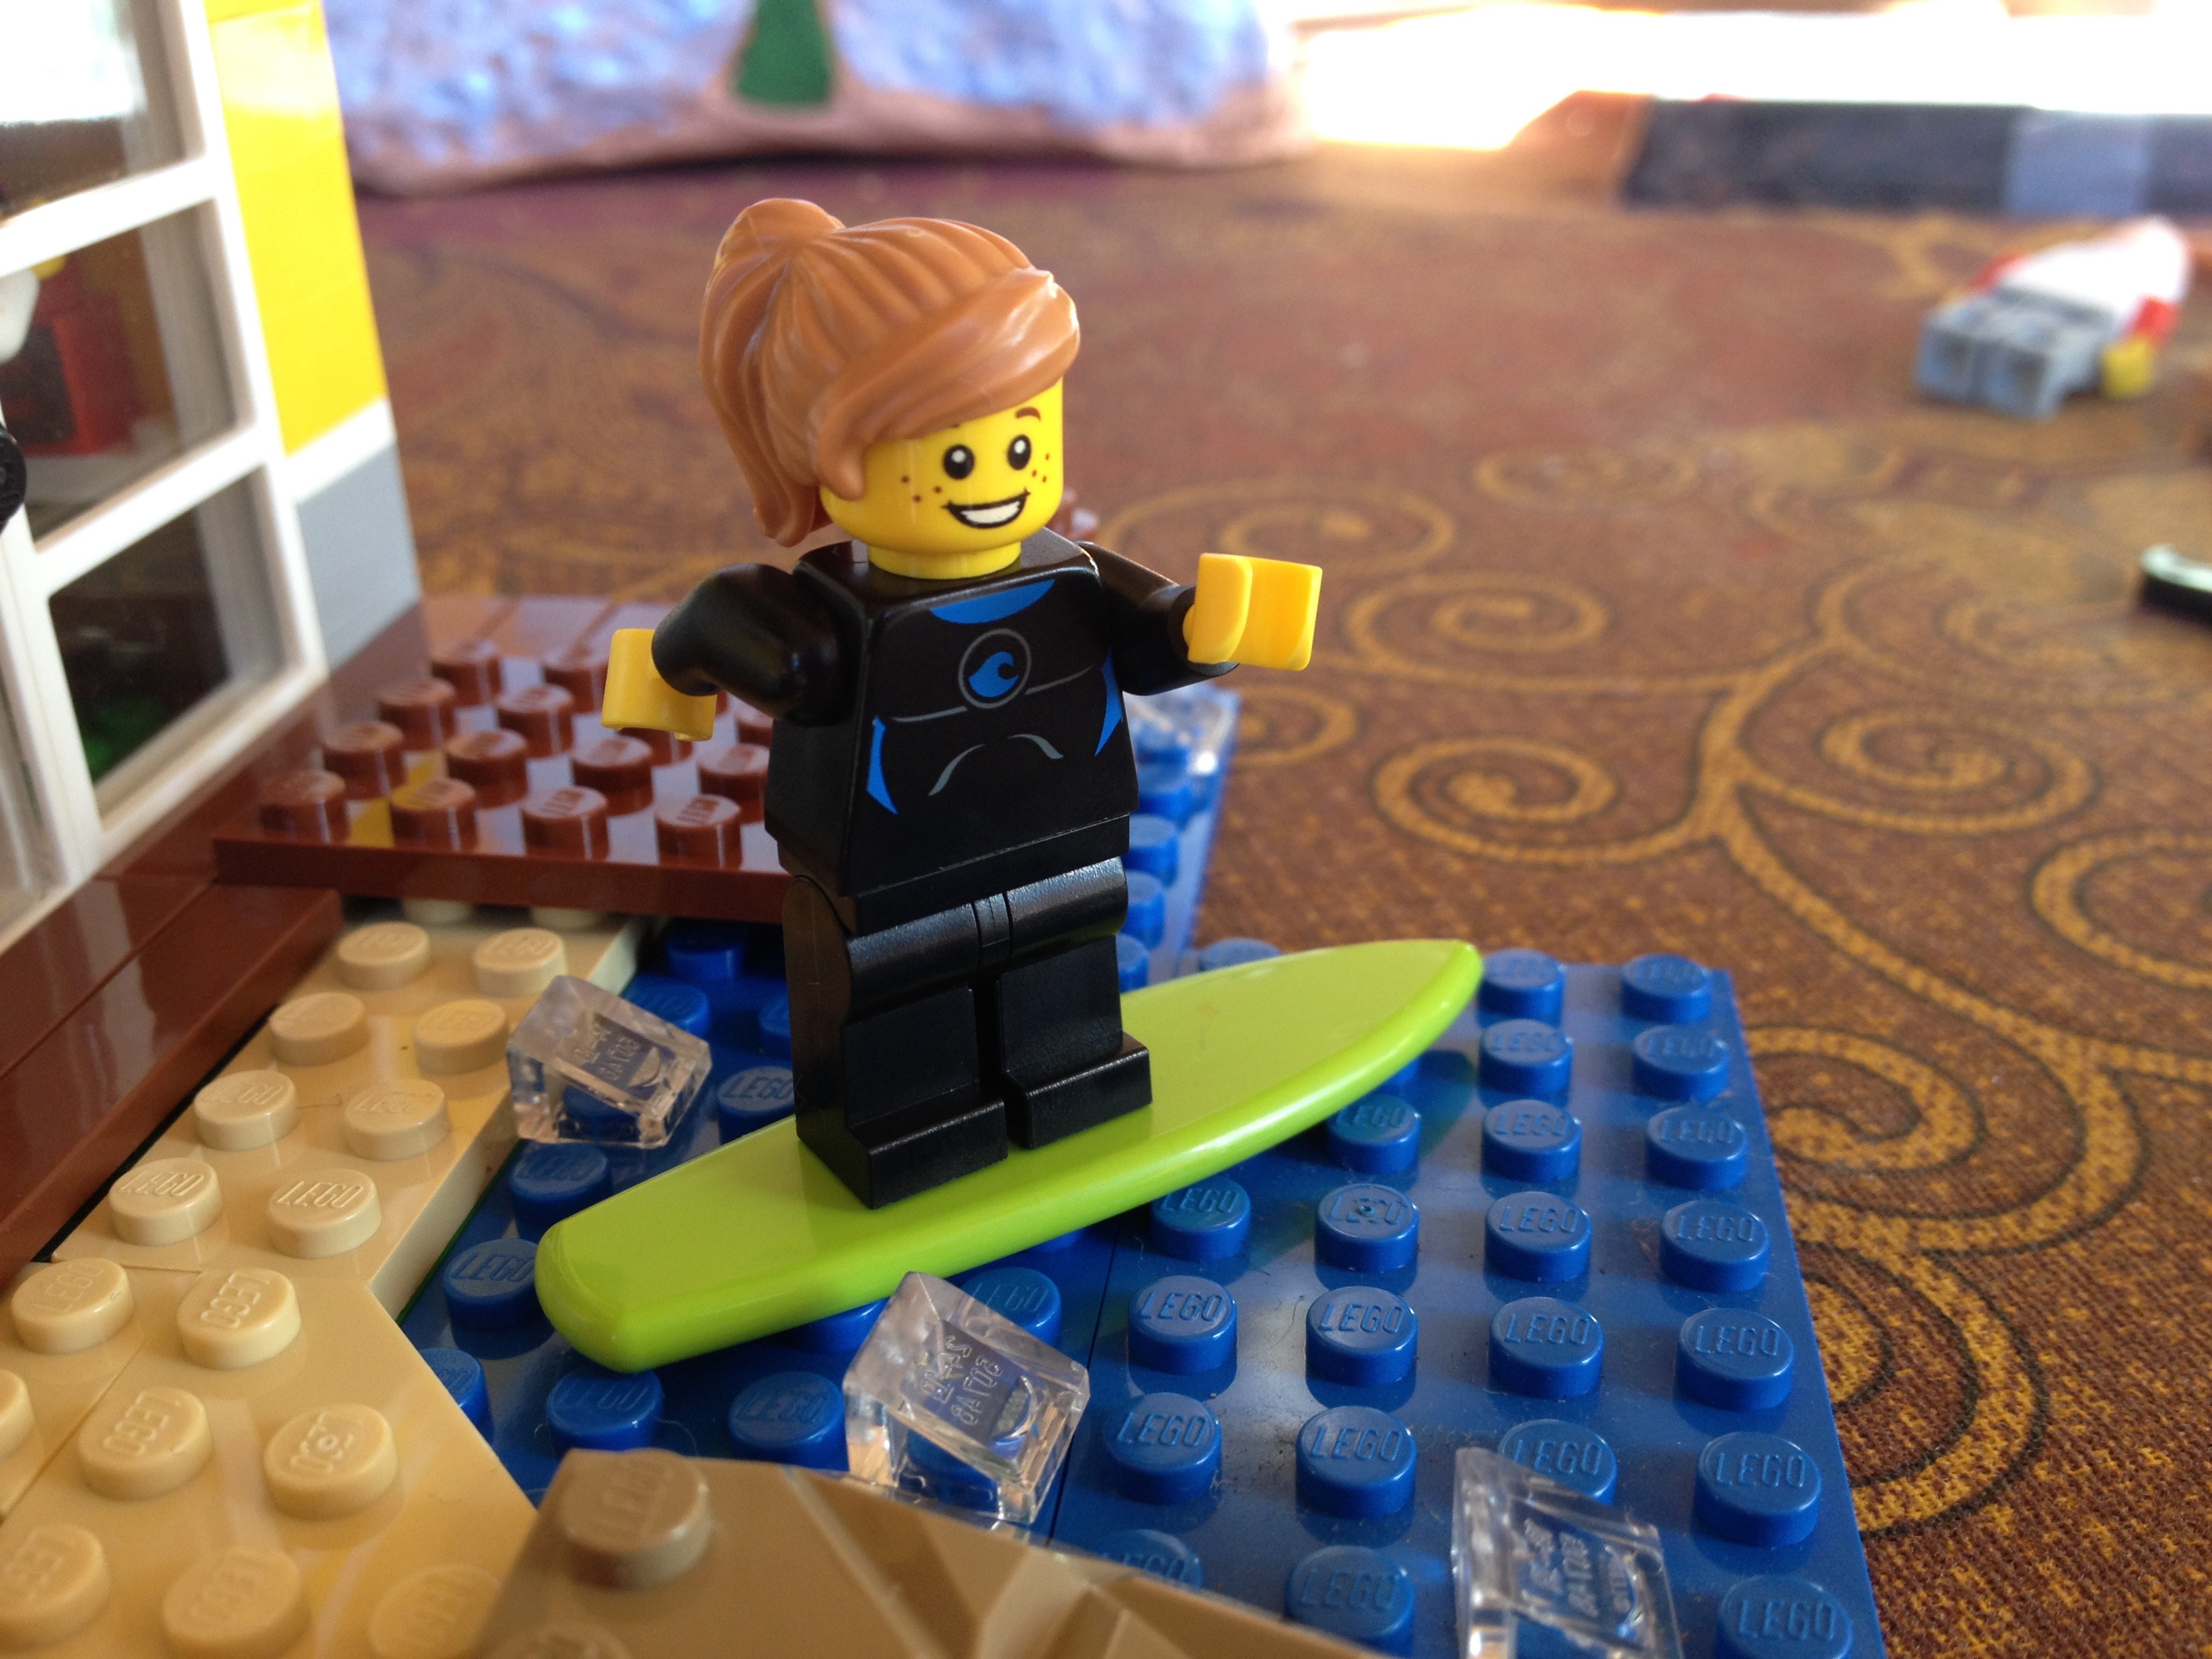 A lego girl with blond hair is surfing on a green lego surf board.